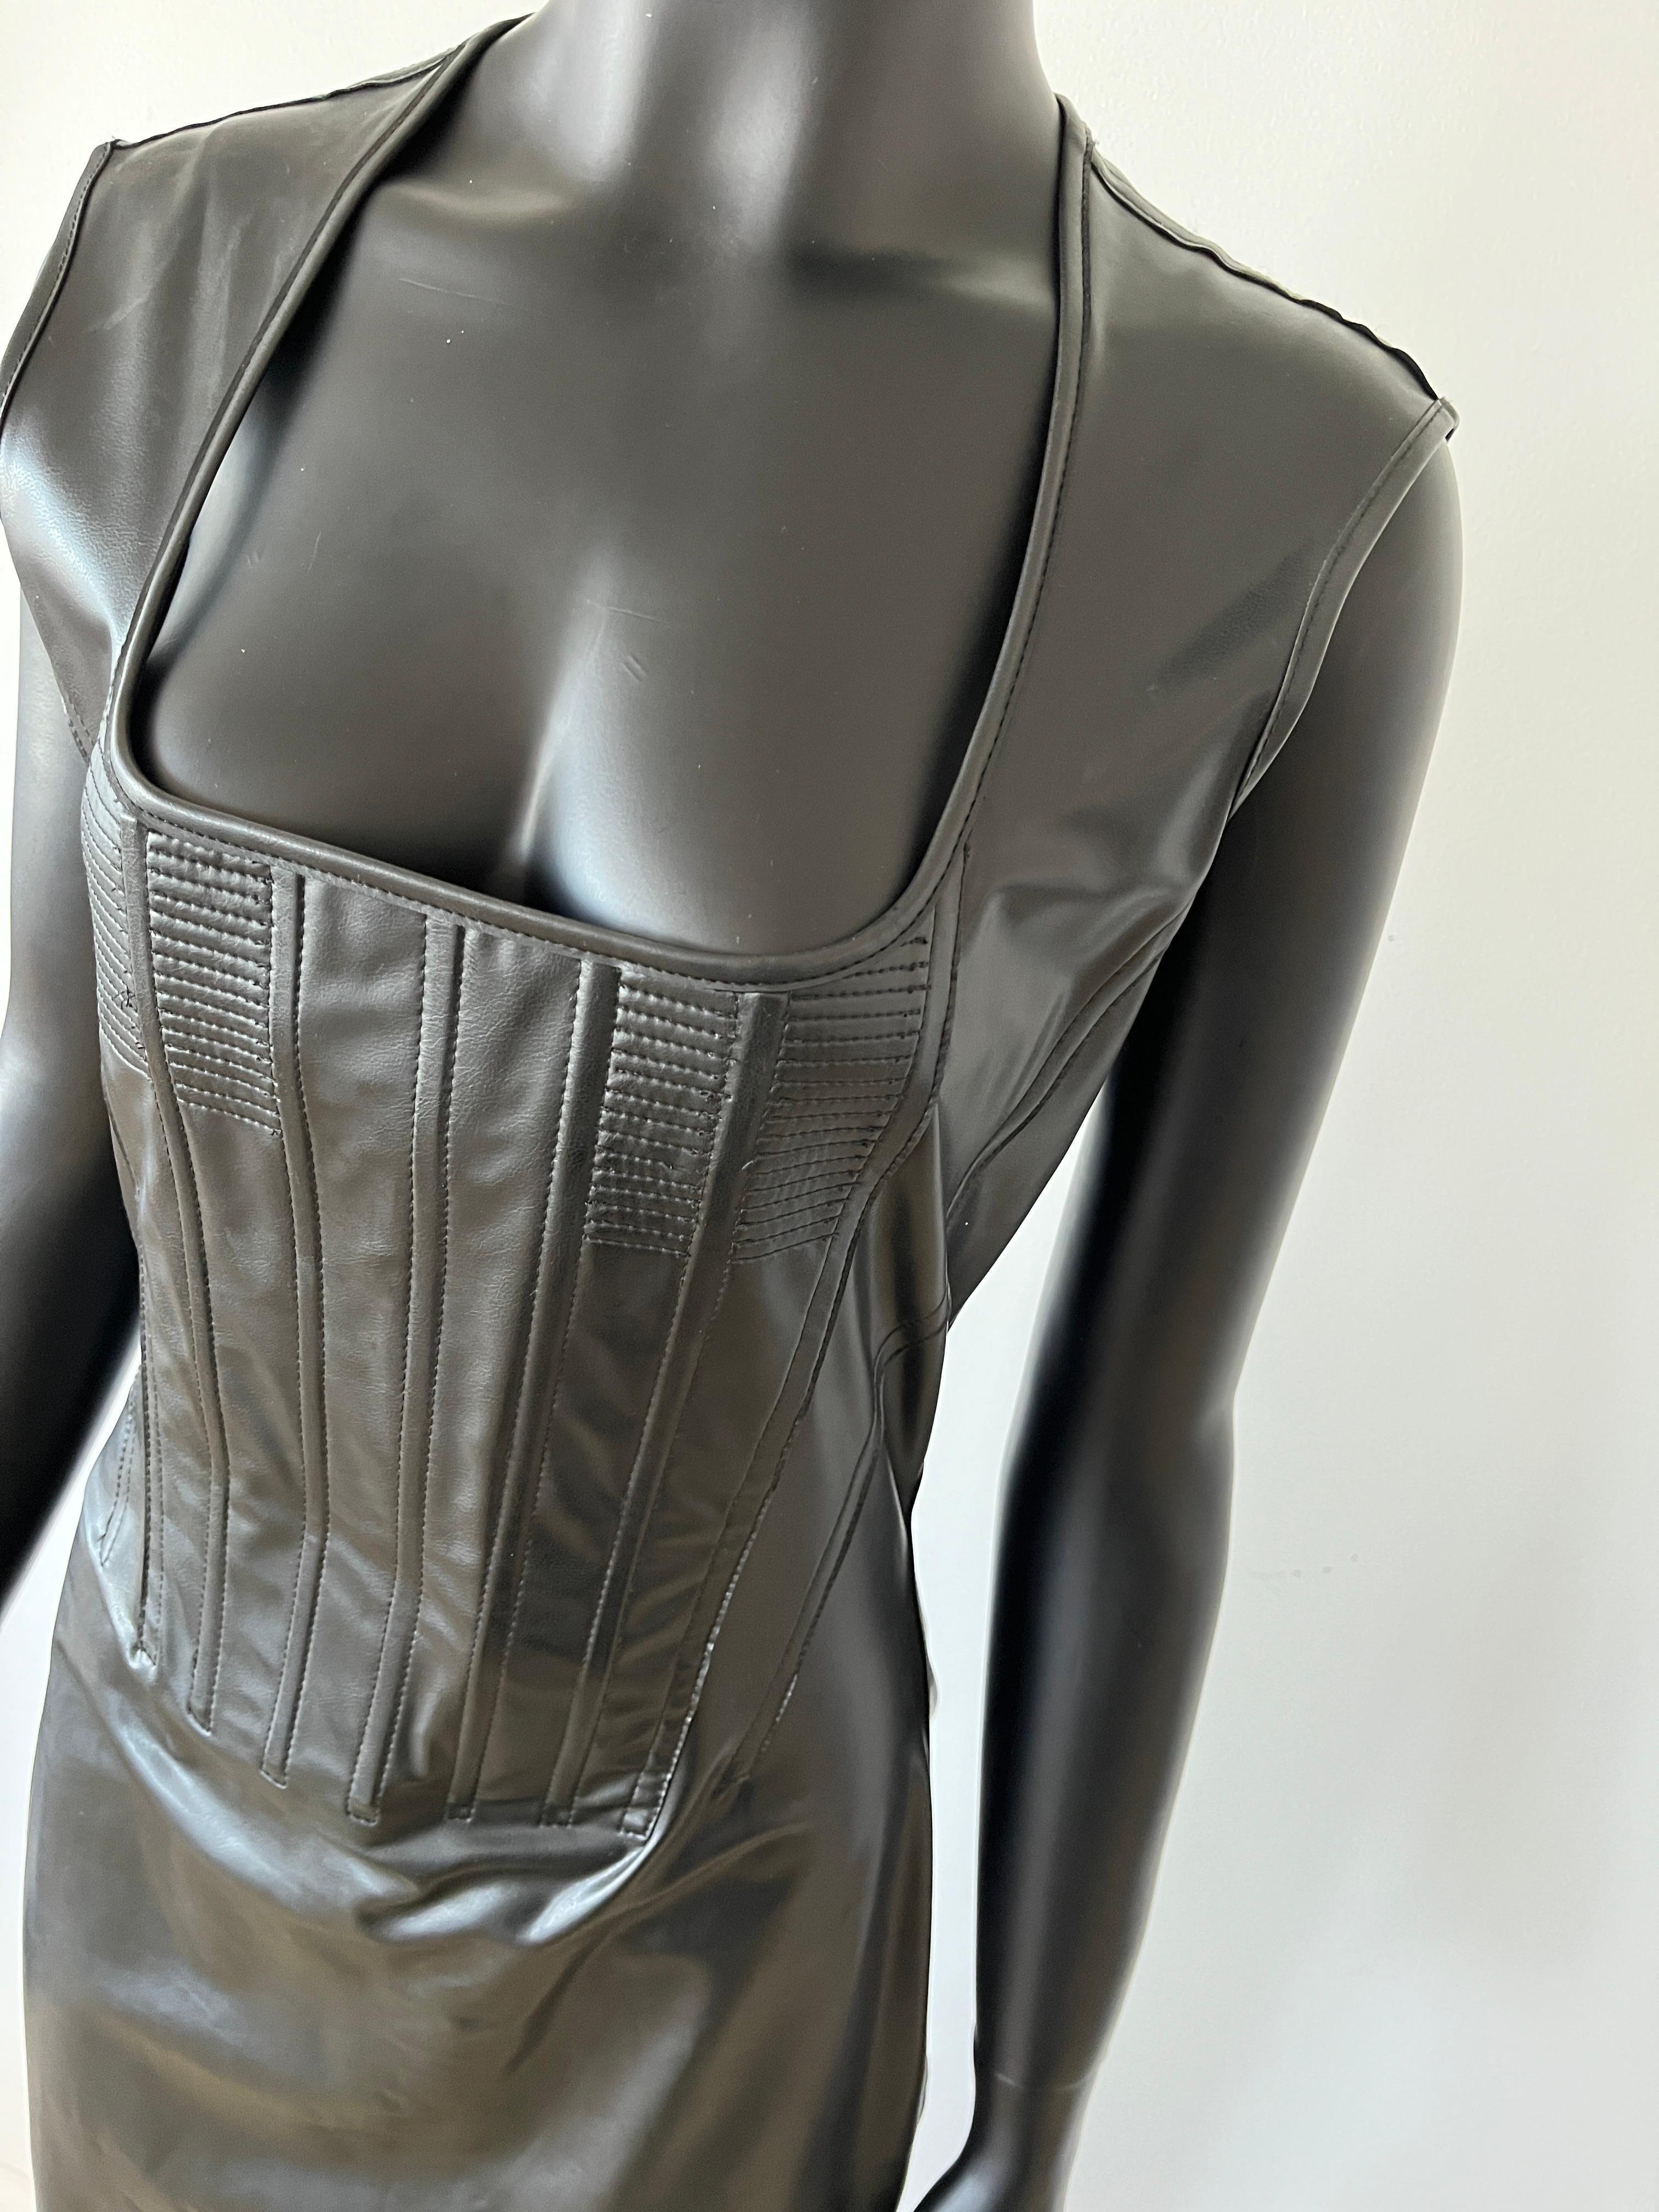 Iconic 1992 Jean Paul Gaultier Dominatrix Vinyl Skin Corset Zipper Bodycon Dress in black with lace up back.
A true collector's piece.

No size label but would fit small to medium. The lace and zipper make the sizing slightly adjustable.

Good